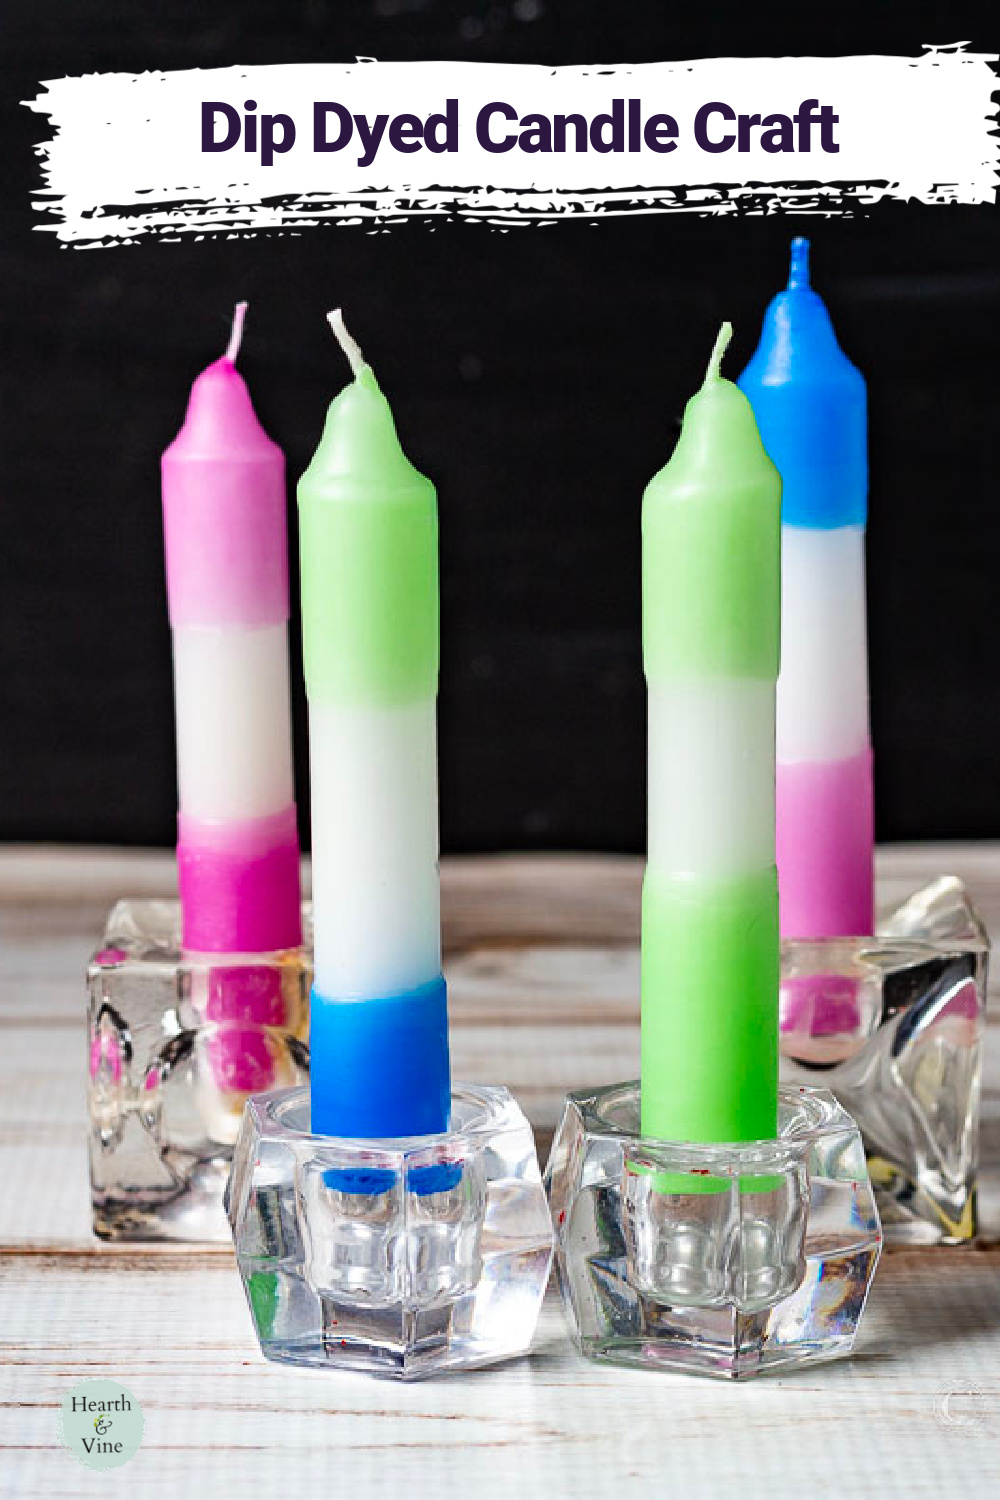 Four dipped dyed candles in small glass  holders.